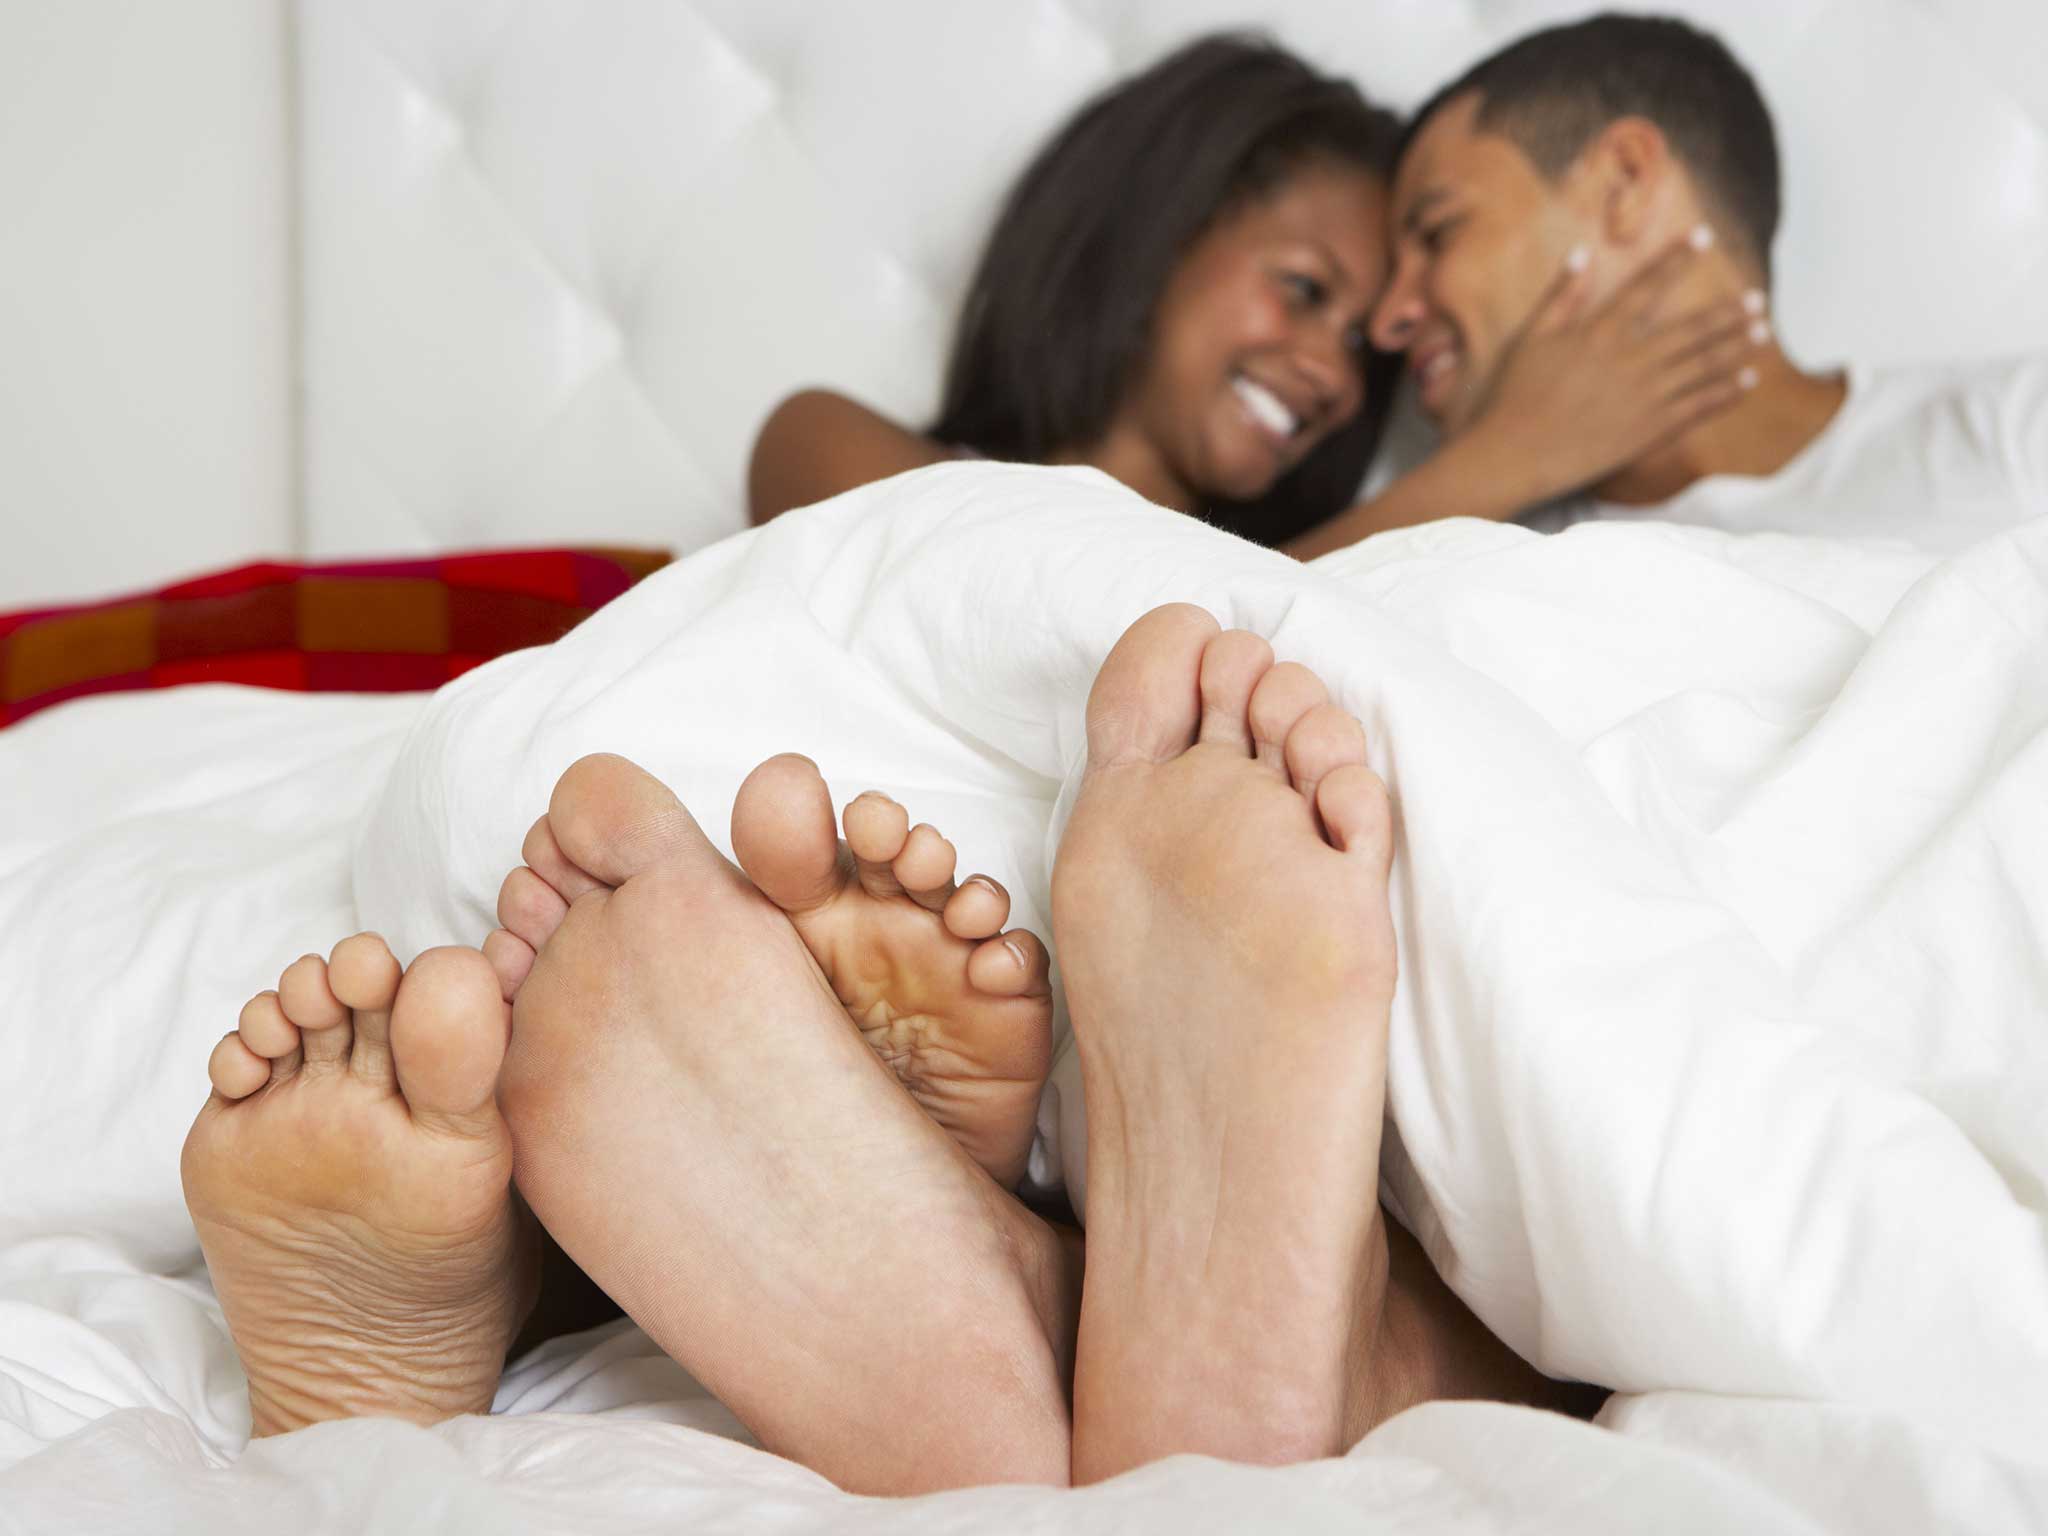 Individuals who have sex more frequently are likely to be better paid